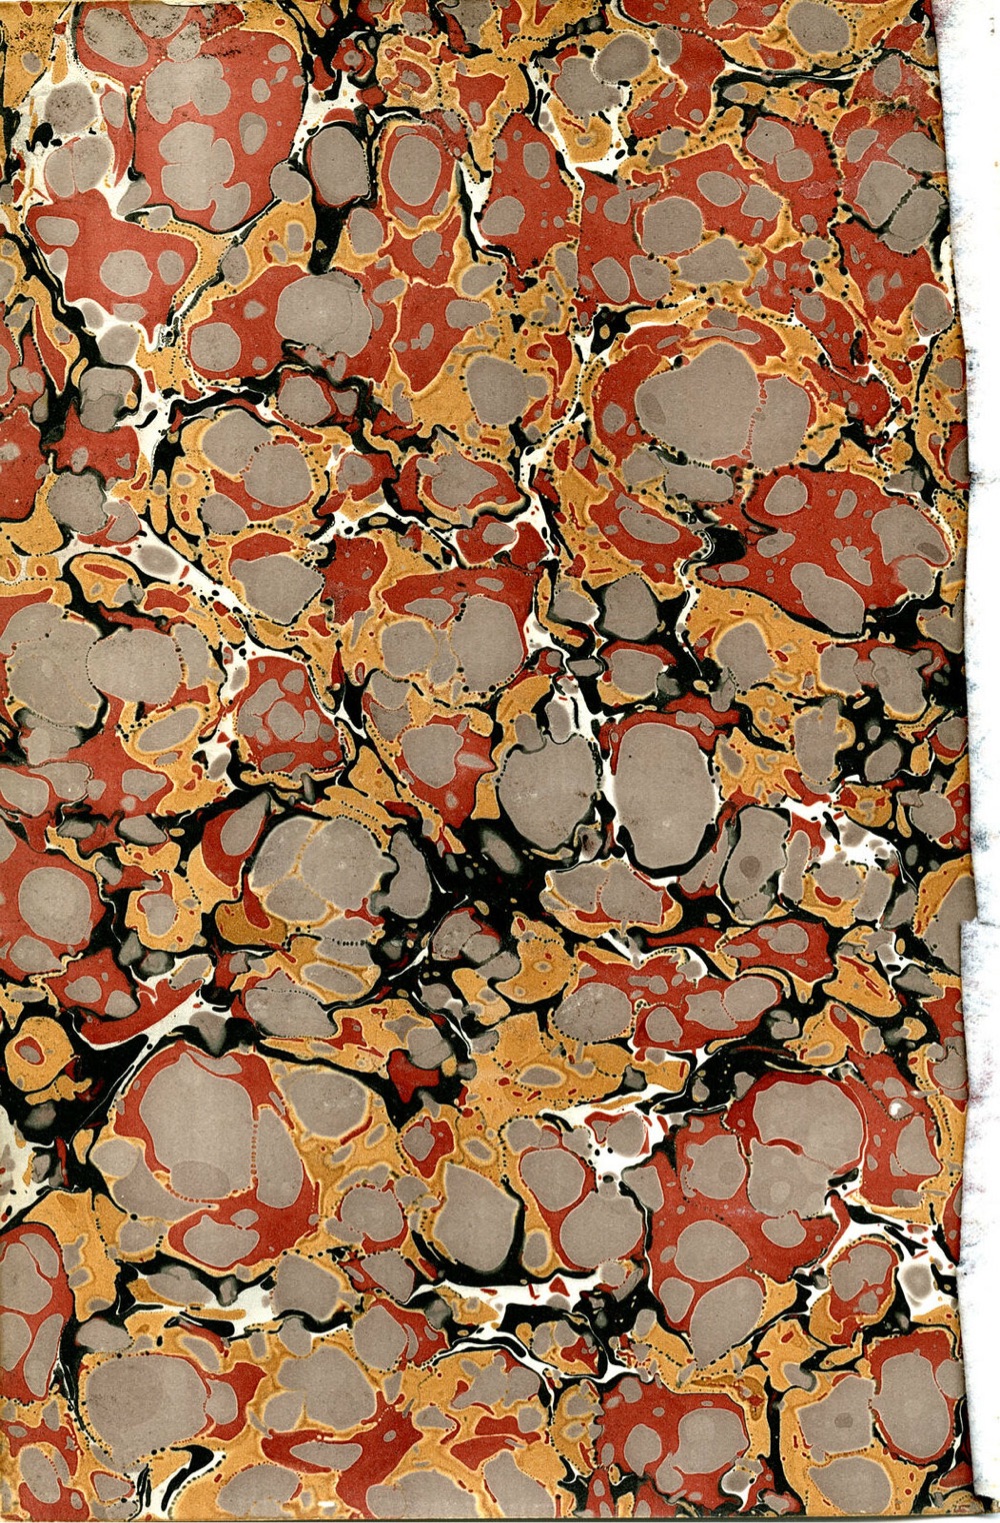 paper with a marbled pattern